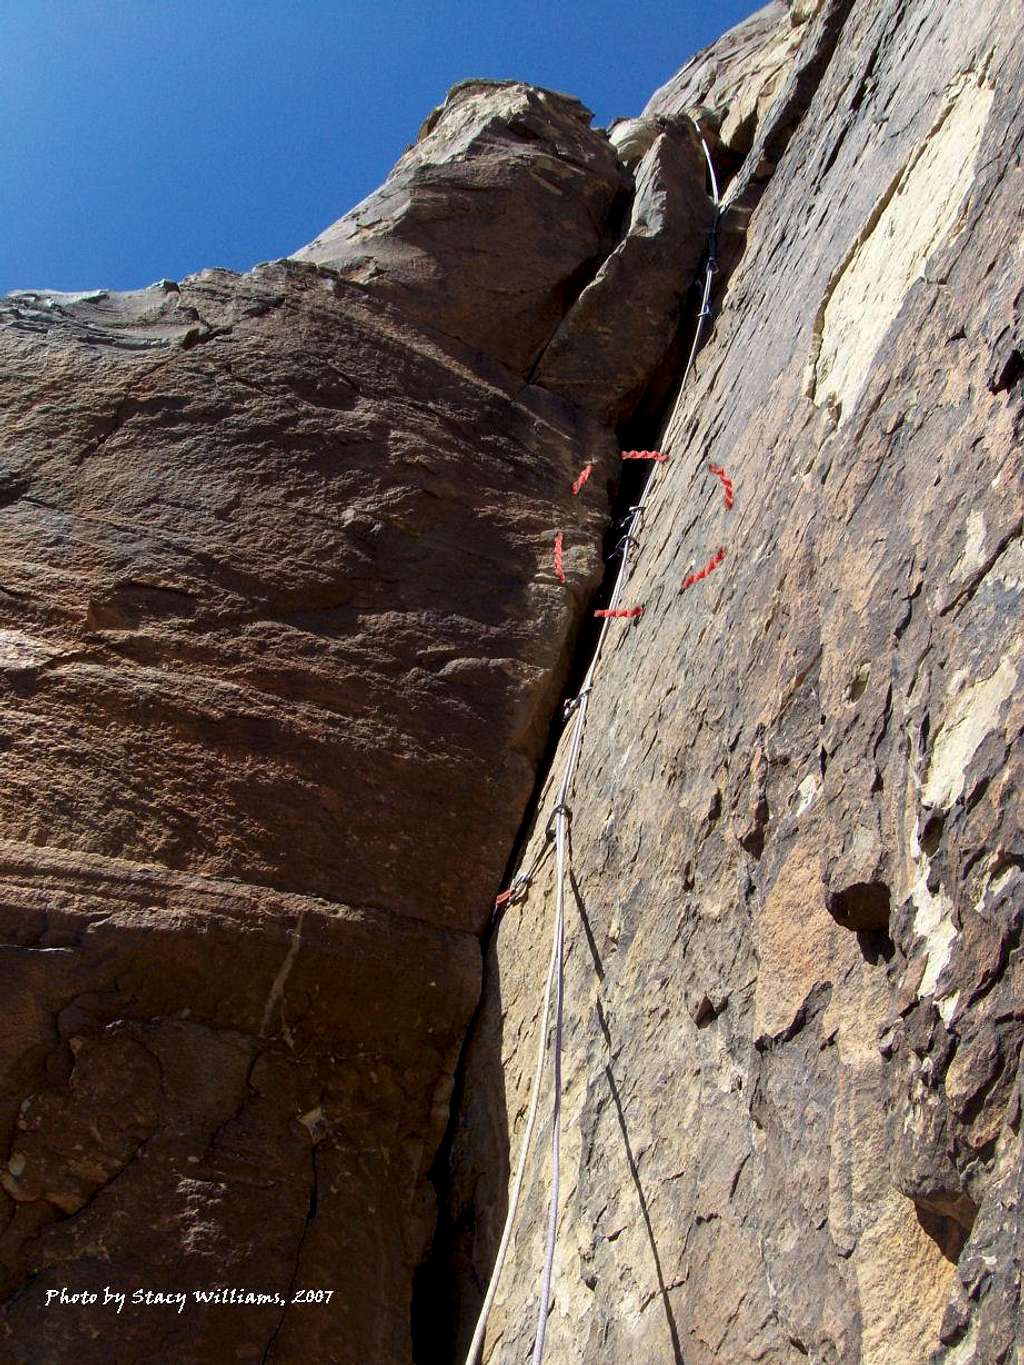 Book of Prophesy, 5.8 or 5.10a